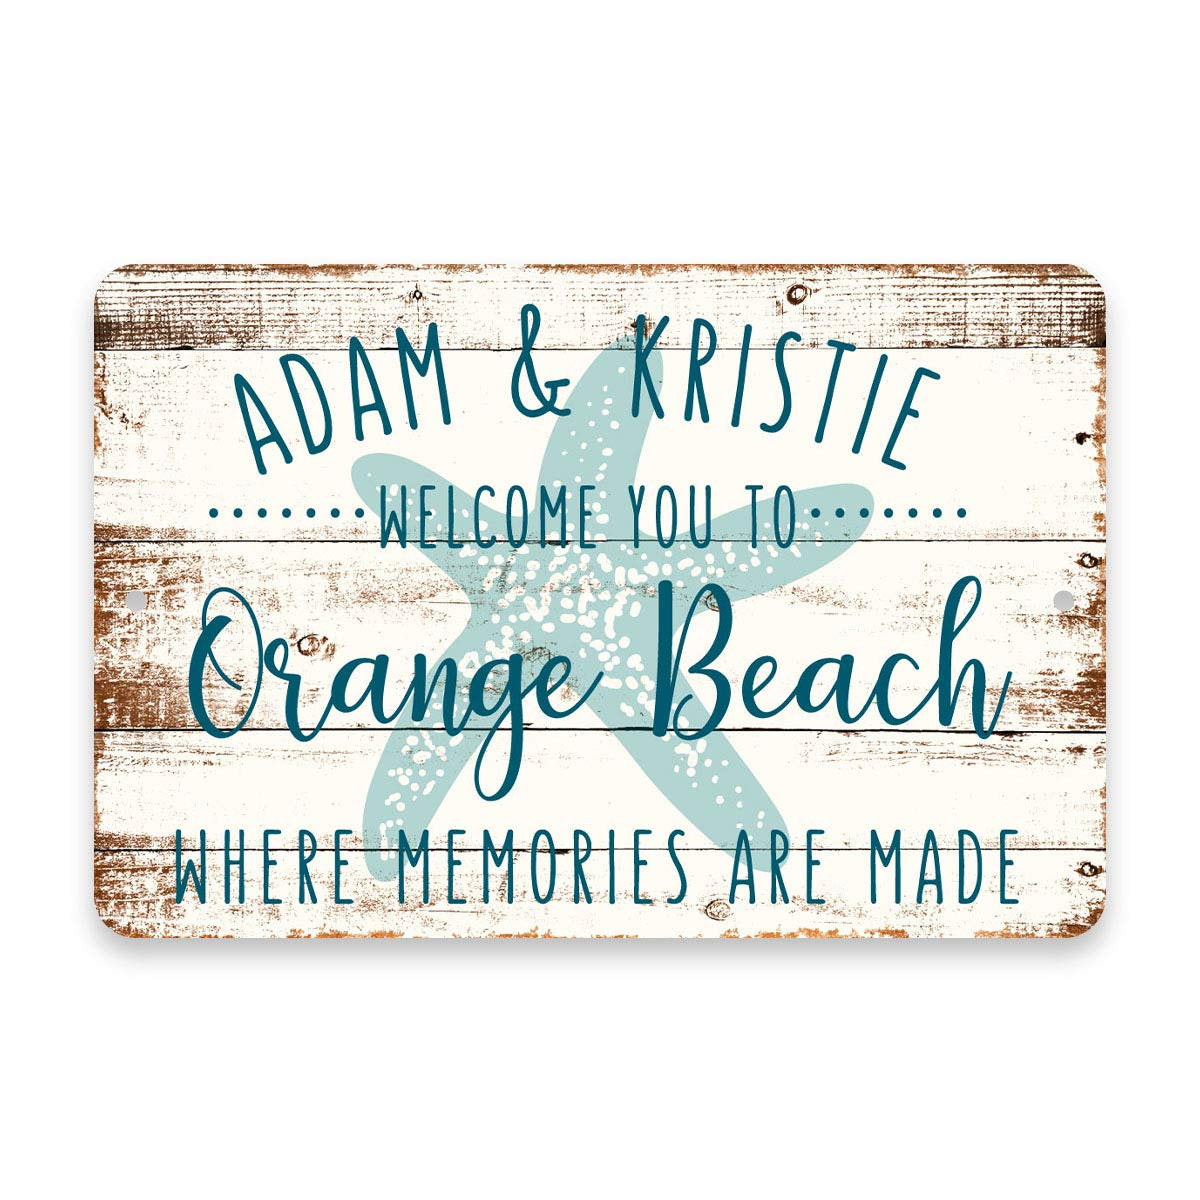 Personalized Welcome to Orange Beach Where Memories are Made Sign - 8 X 12 Metal Sign with Wood Look